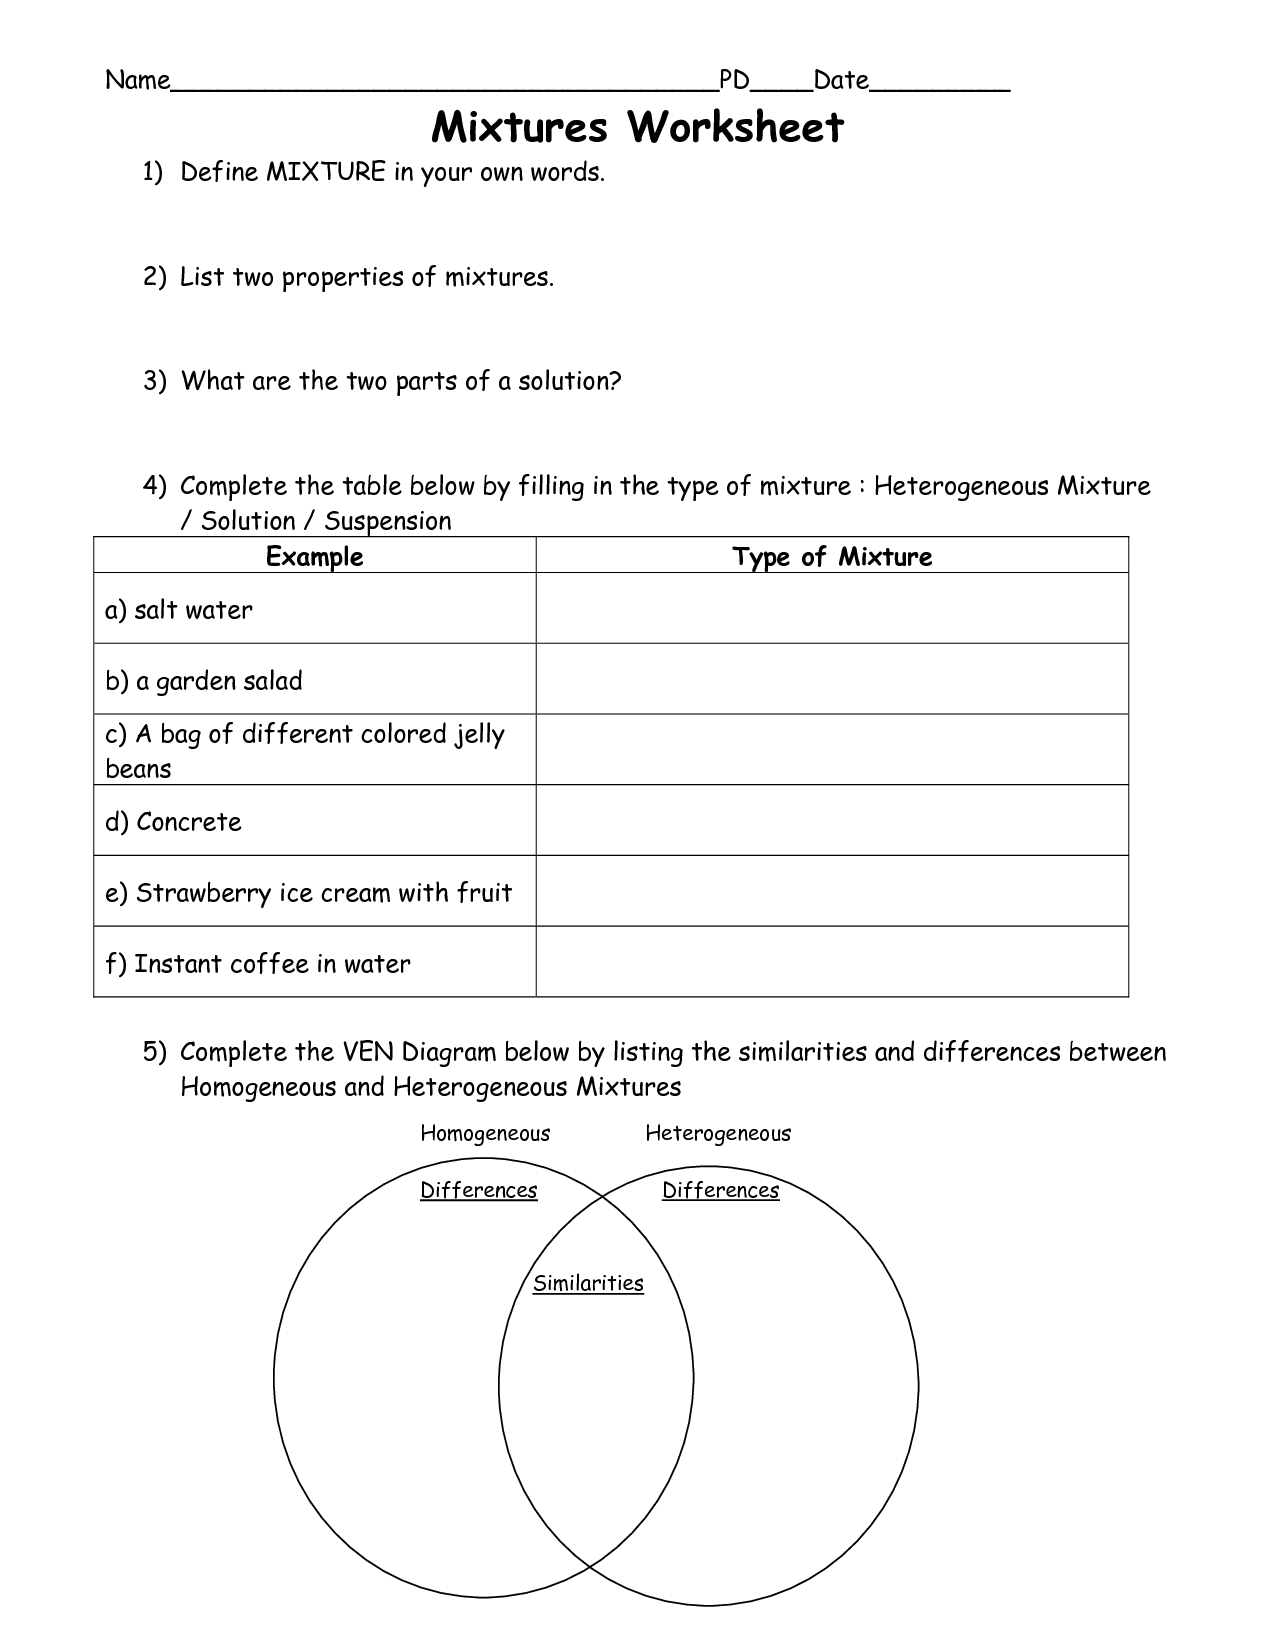 11 Best Images of 5th Grade Science Mixtures And Solutions Worksheets  Mixtures and Solutions 